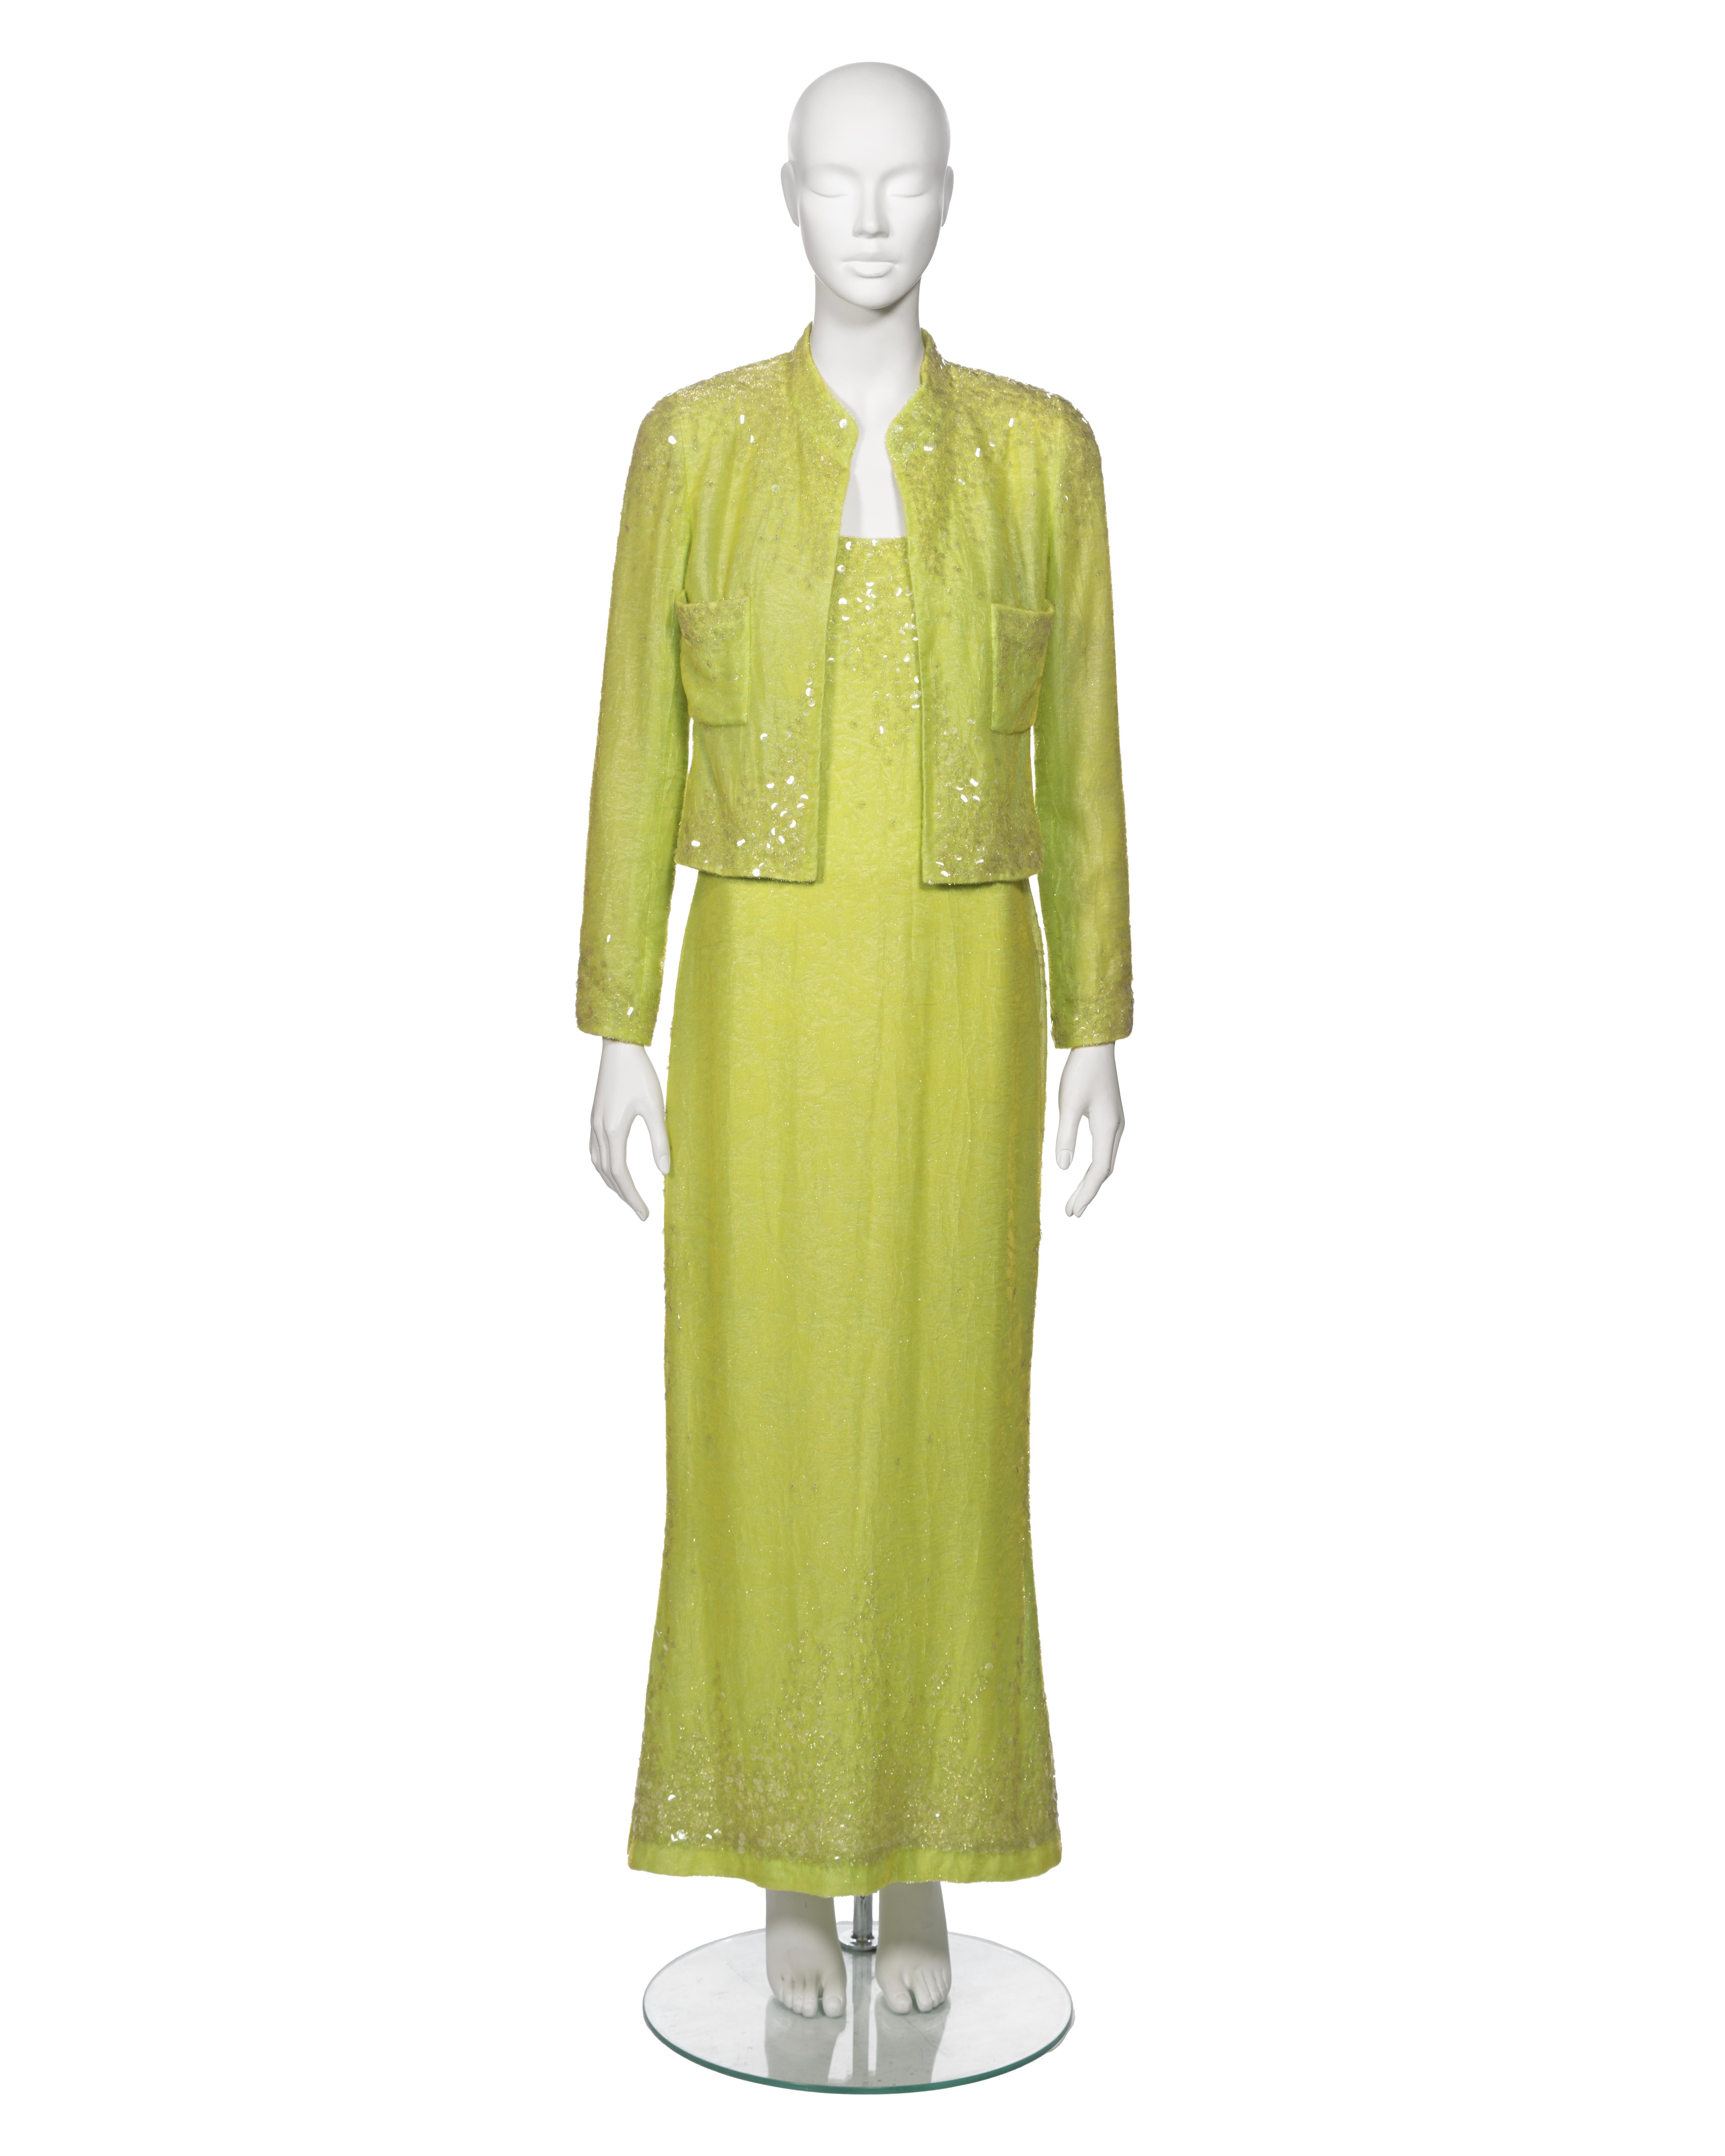 Chanel by Karl Lagerfeld Embellished Lime Green Velvet Dress and Jacket, ss 1997 For Sale 3